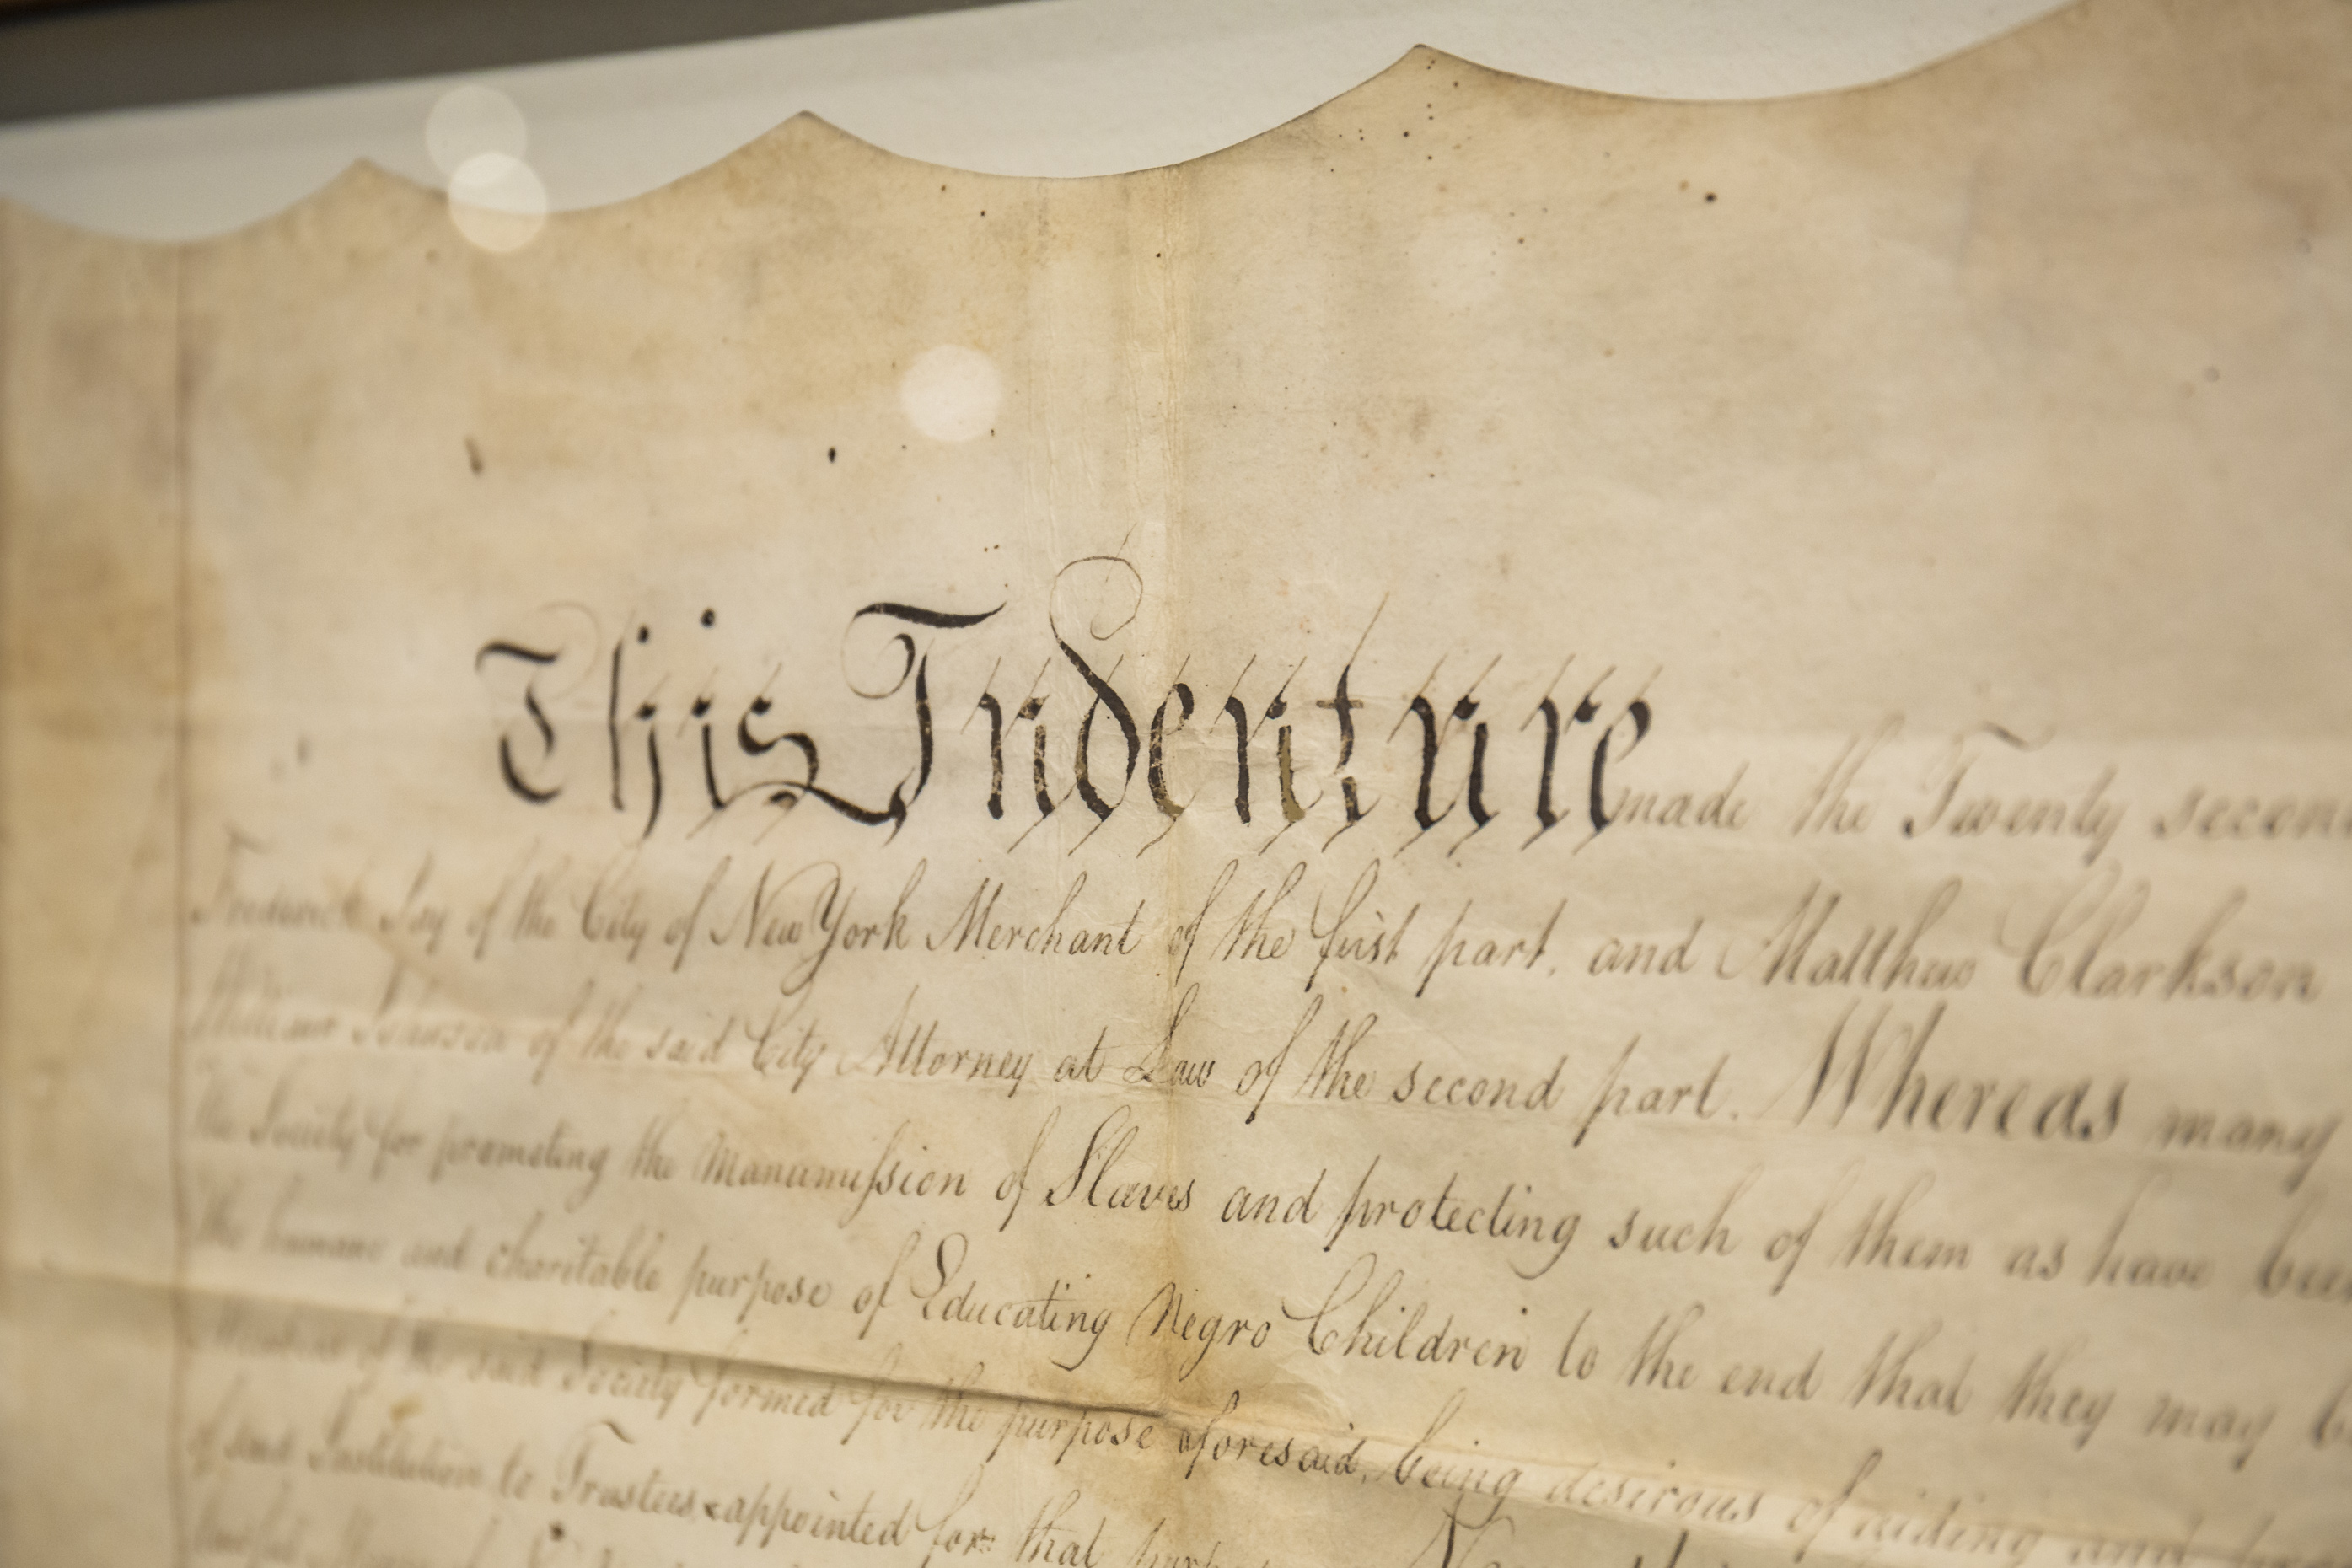 A 1794 land deed for the first African Free School location in lower Manhattan. (Courtesy of Sotheby's)